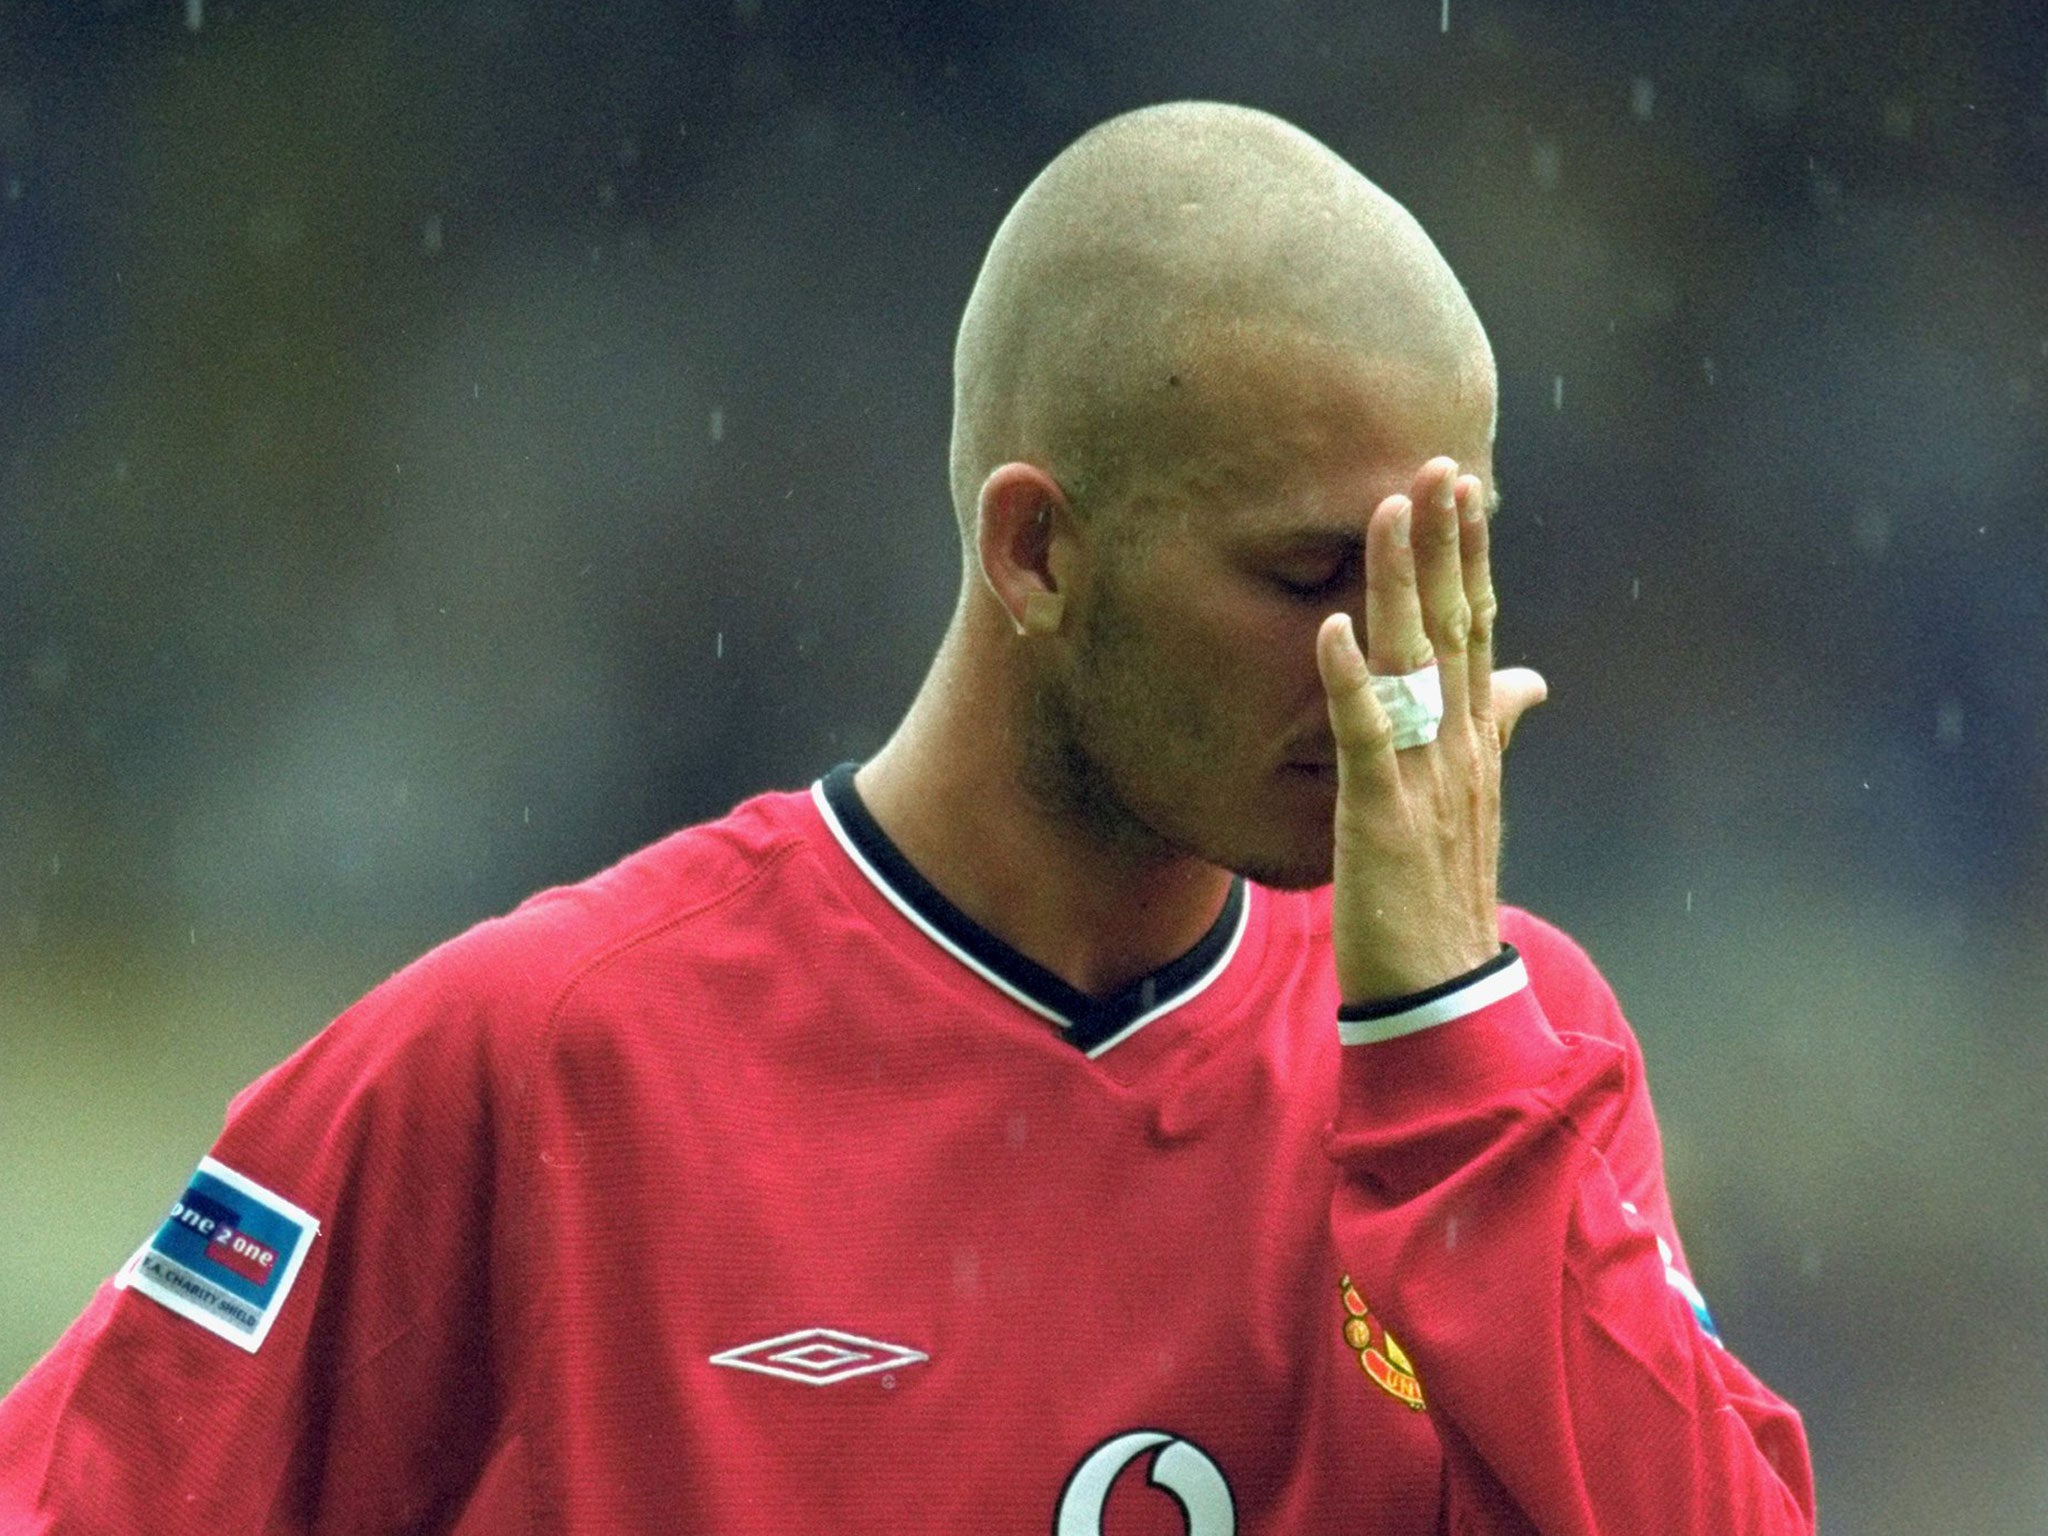 David Beckham pictured with his freshly shaven head during the 2000 Charity Shield